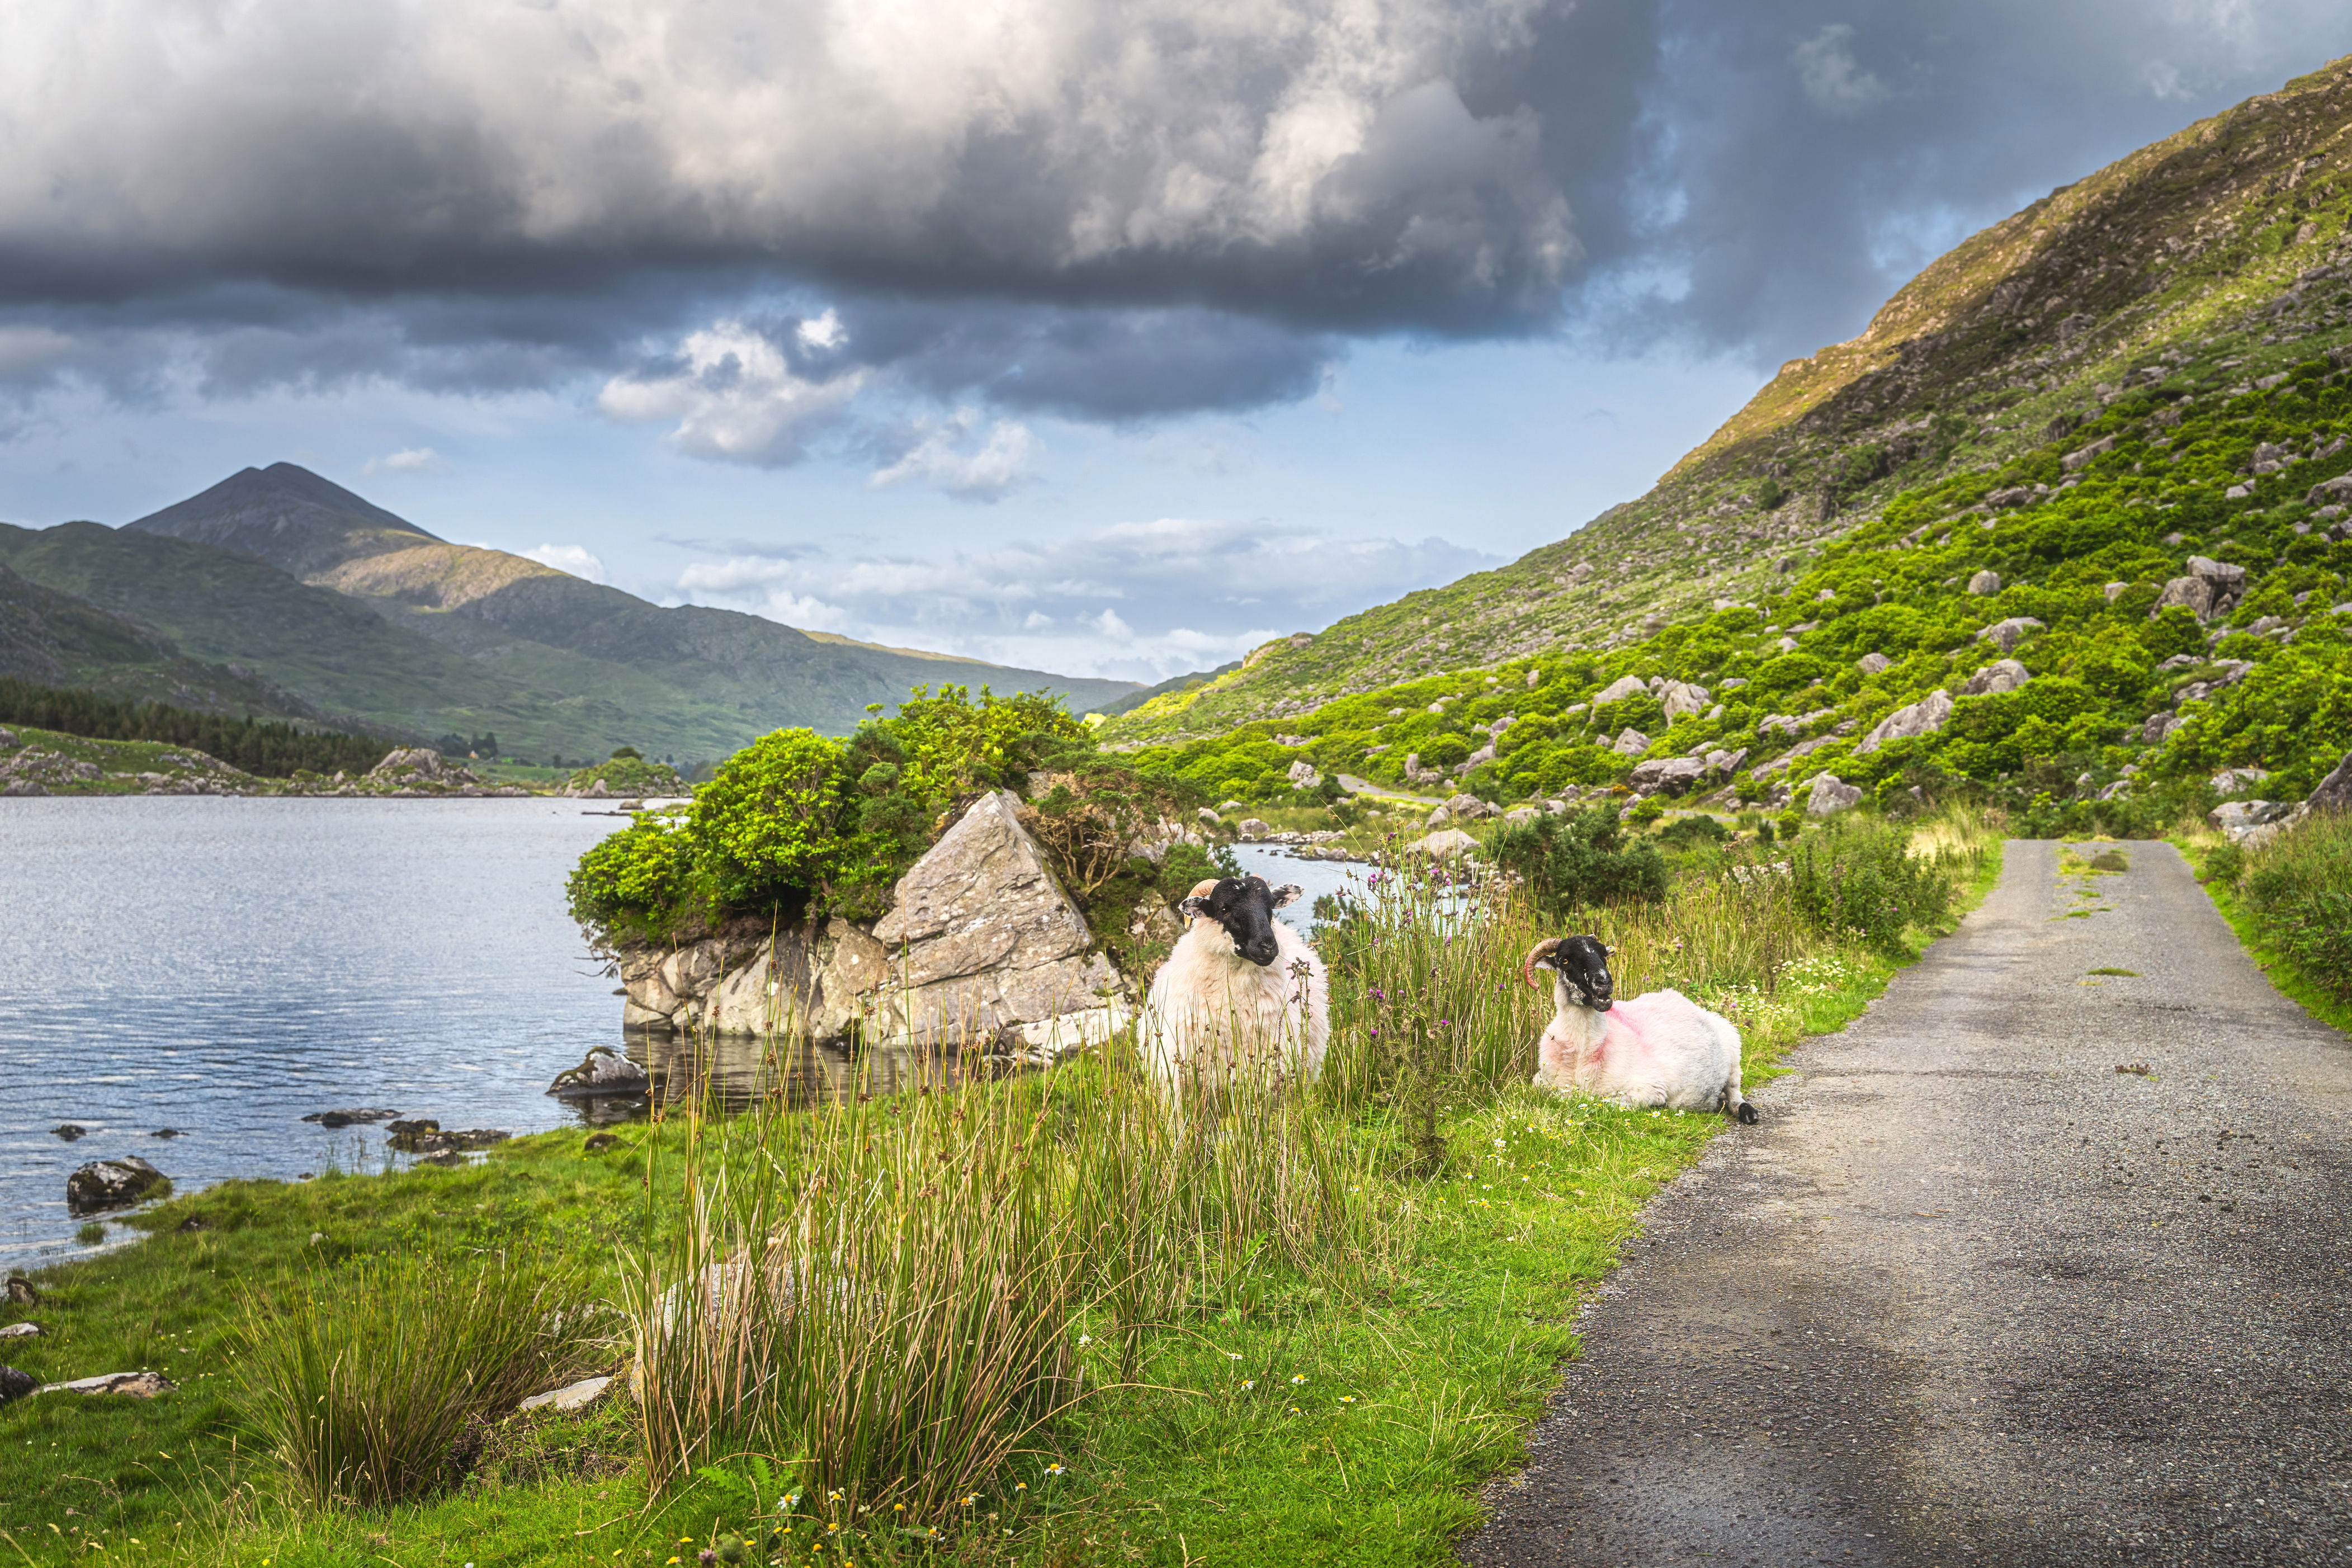 <p><strong>Location:</strong> County Kerry</p> <p>The Ring of Kerry, a 111-mile-long drive that loops around the Iveragh Peninsula, is really like several dozen beautiful places packed into one: The route passes by Killarney National Park, Skellig Michael, and several more entries on this list. Driving (<a href="https://www.cntraveler.com/story/best-hiking-in-europe?mbid=synd_msn_rss&utm_source=msn&utm_medium=syndication">or hiking</a>) the Ring of Kerry is a great activity for first-time visitors to Ireland, as it perfectly showcases the country’s green spaces and Atlantic coast.</p><p>Sign up to receive the latest news, expert tips, and inspiration on all things travel</p><a href="https://www.cntraveler.com/newsletter/the-daily?sourceCode=msnsend">Inspire Me</a>